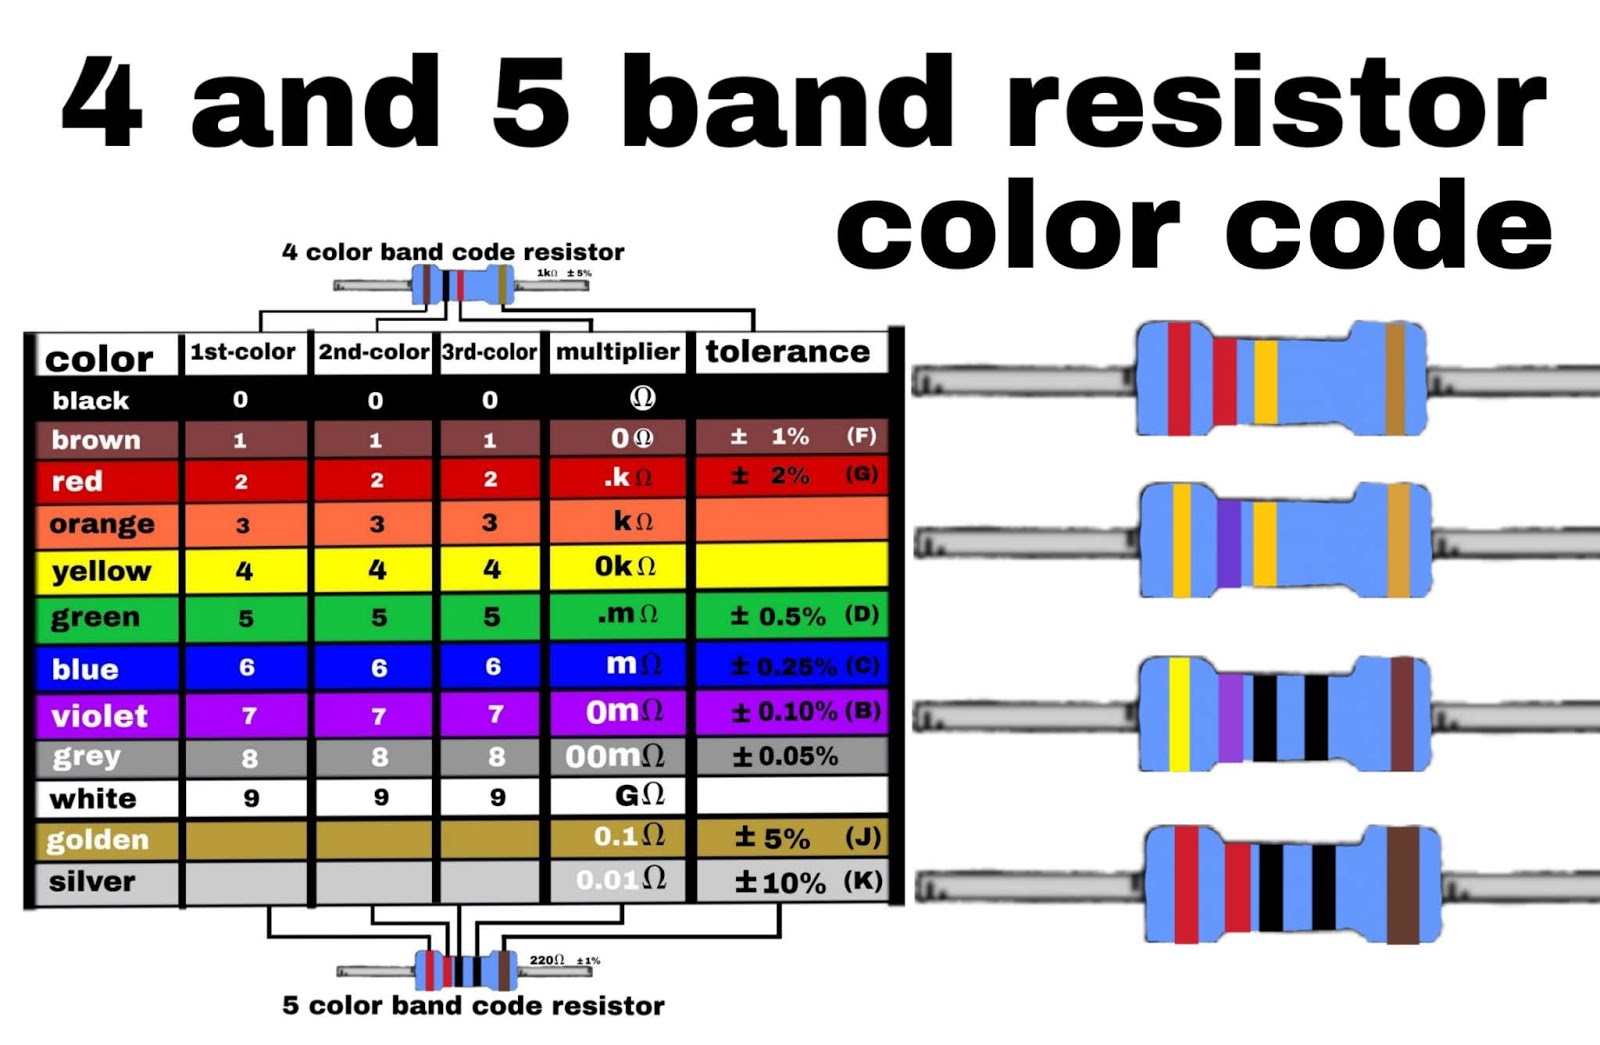 Resistance Color Code Chart With Examples Of 4 And 5 Band.